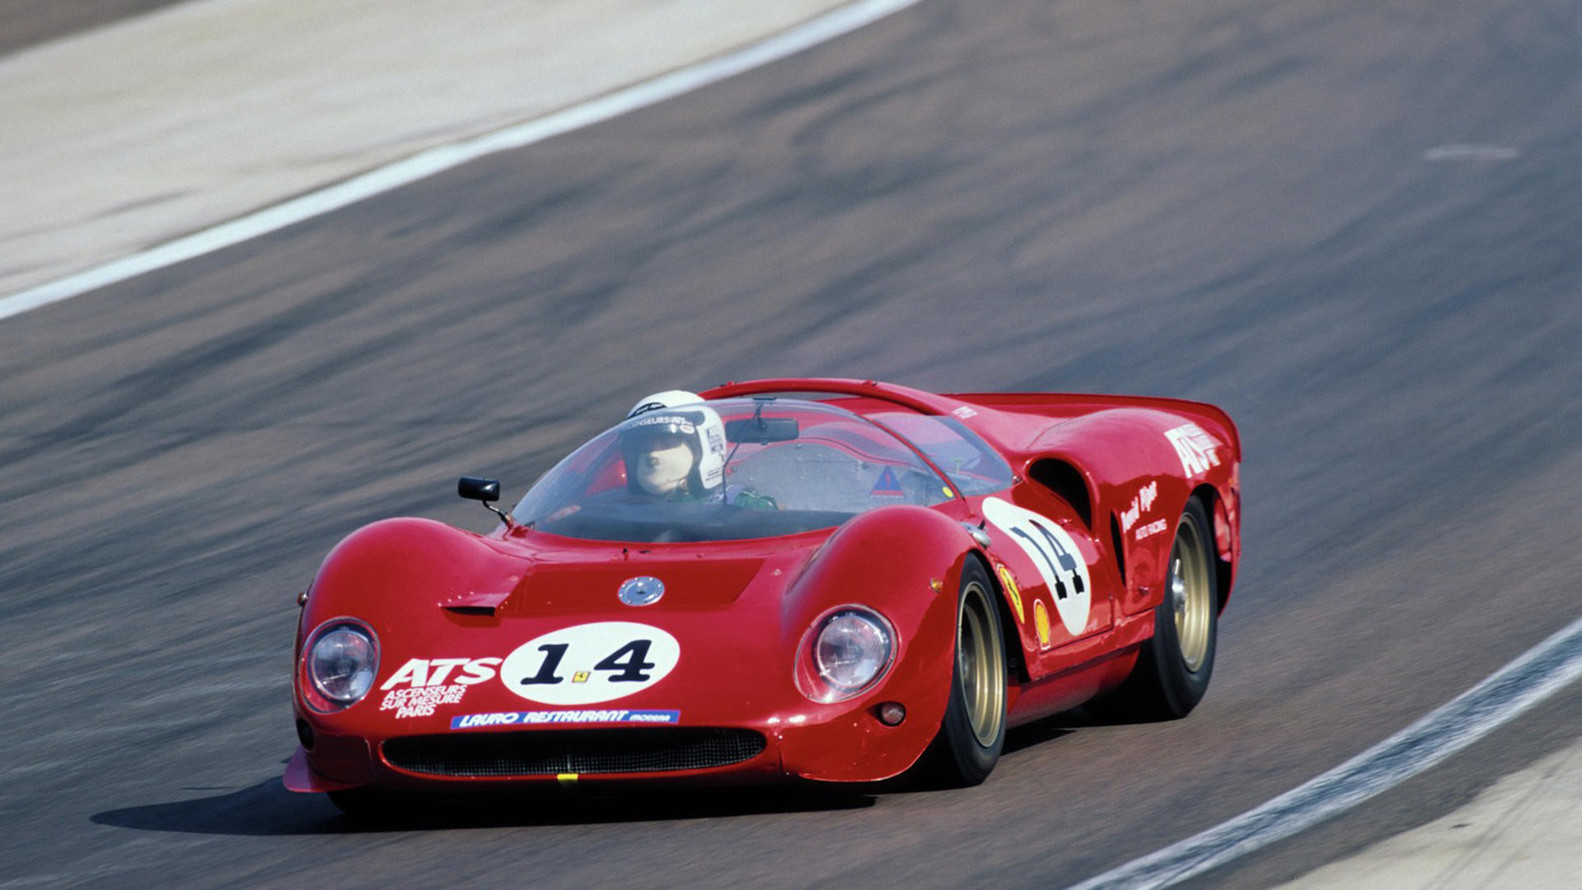 Front-angled shot of a Ferrari 330 P2 driving at speed on a racetrack.